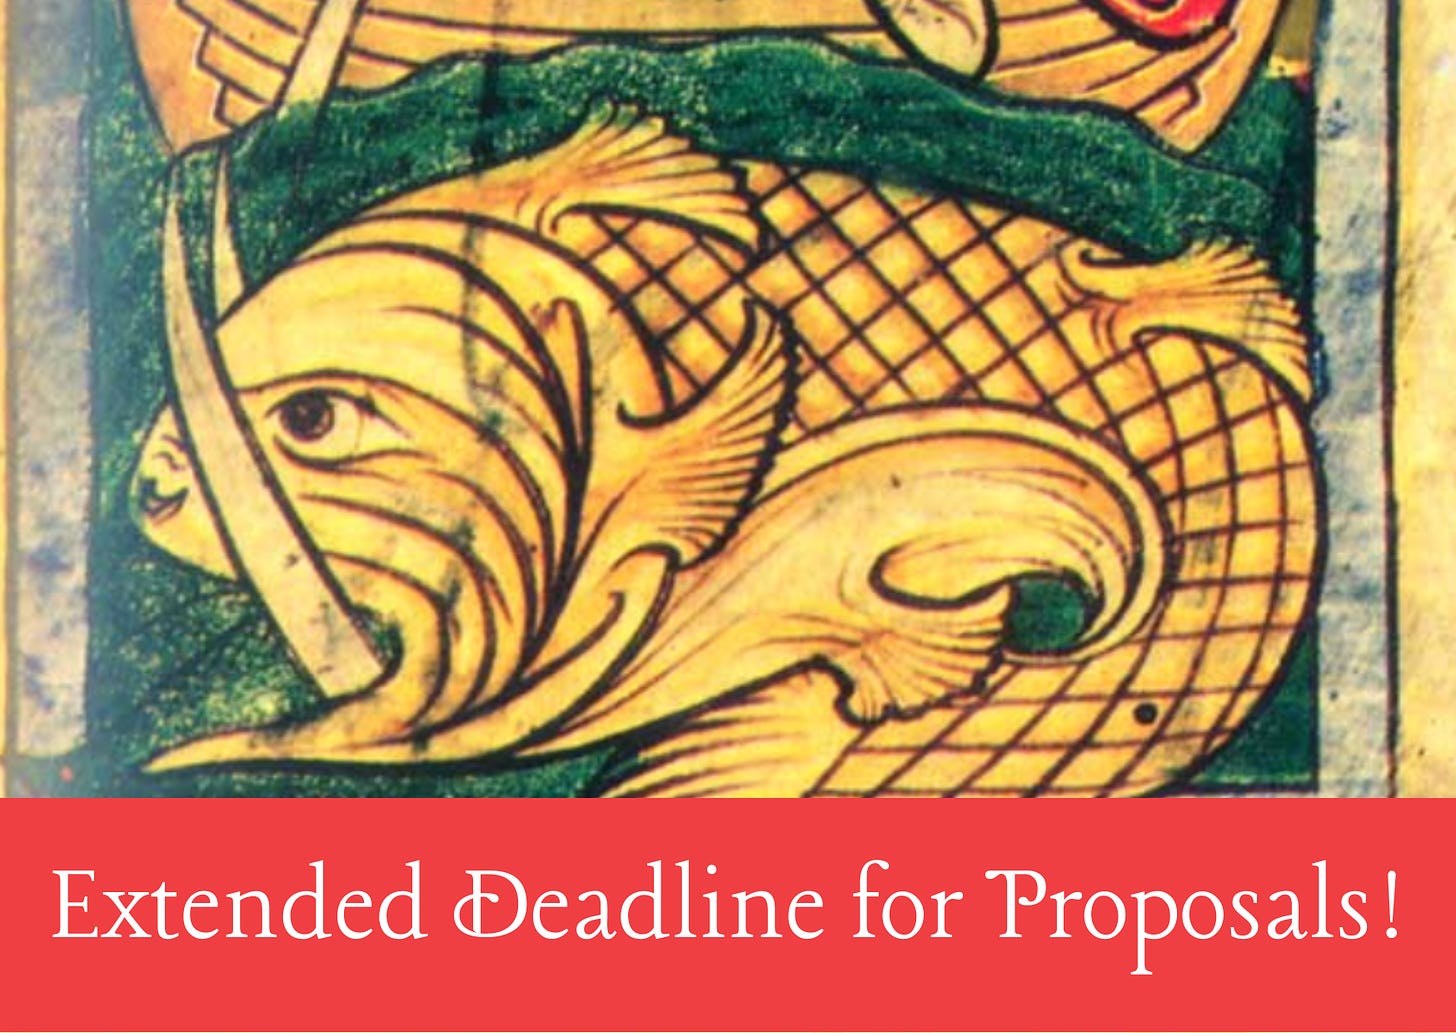 Manuscript image of fish with text headline exdended deadline for proposals